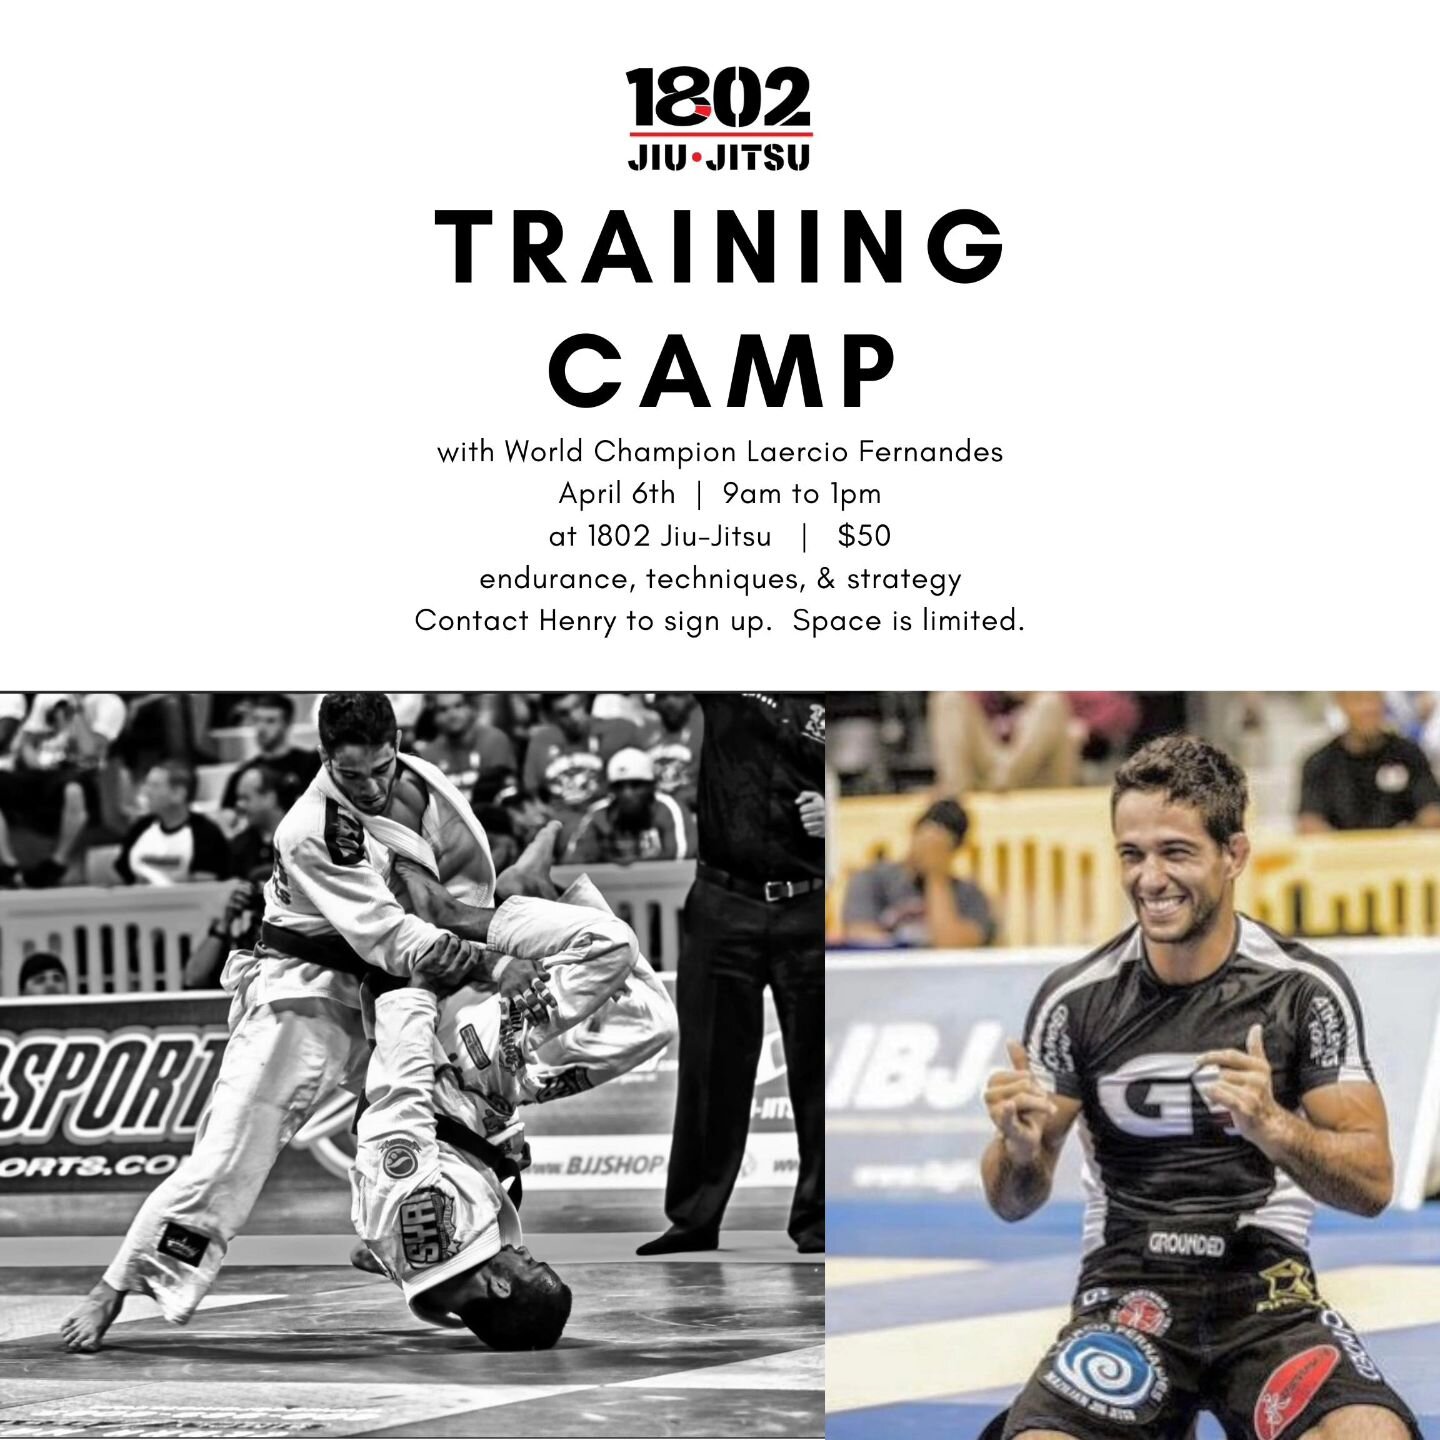 This Saturday 9am at 1802 jiu jitsu. Don't miss your chance to learn from World Champion Laercio Fernandes.  Professor Henry's professor. Please message for more details.